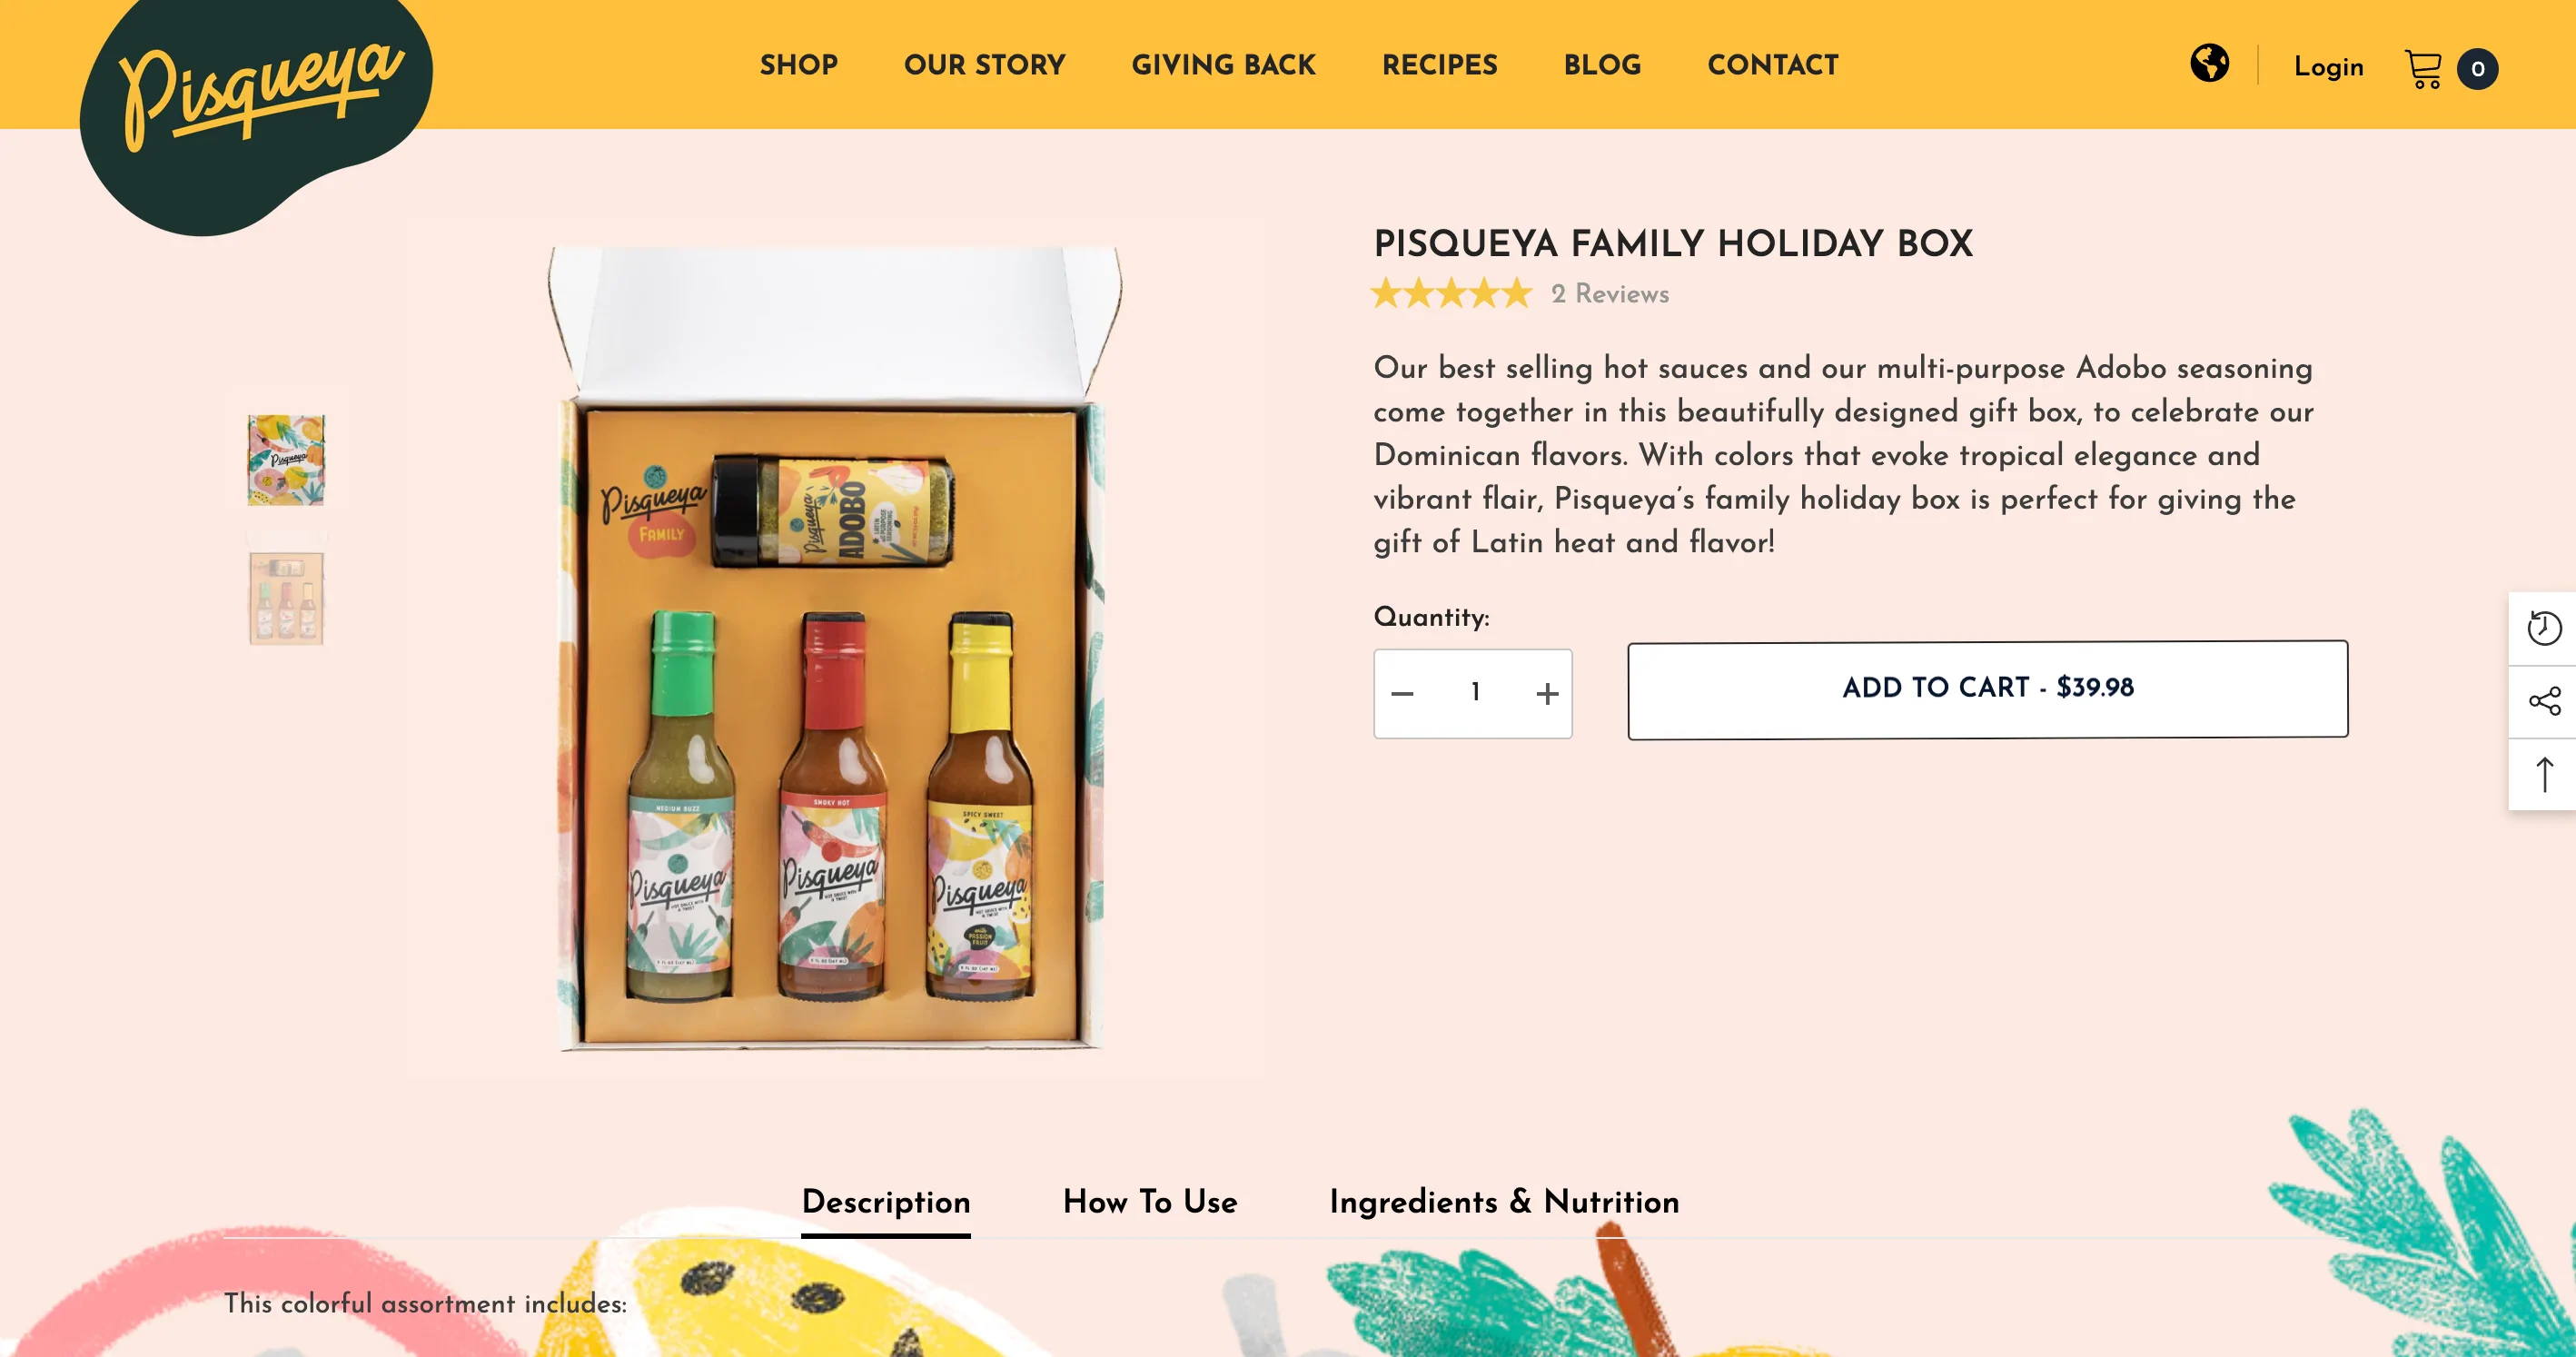 Product page for a hot sauce company